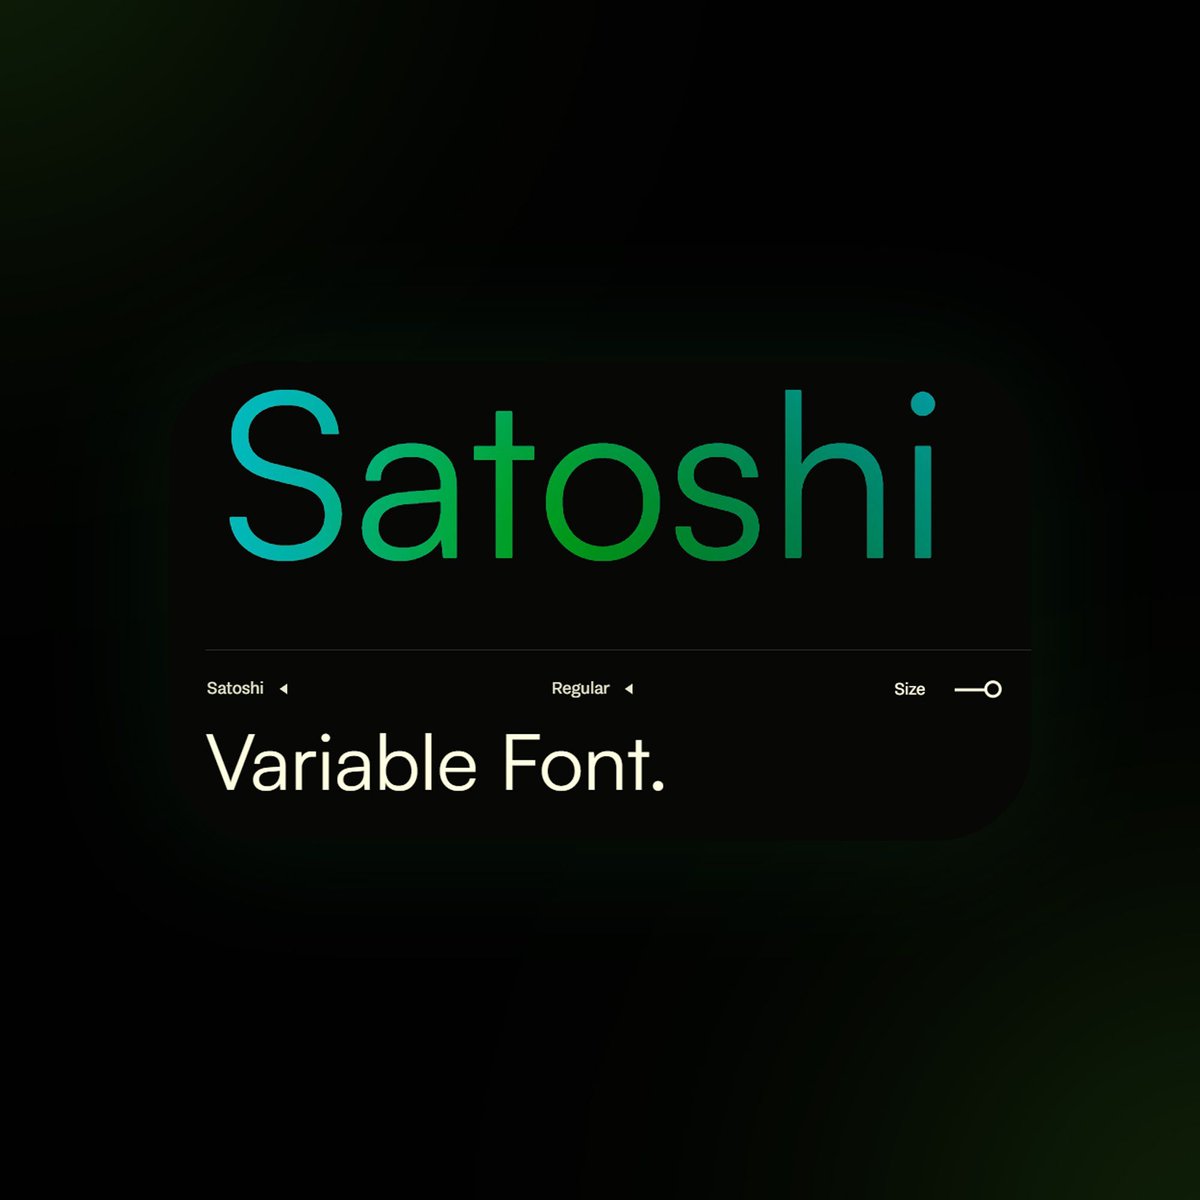 Here are my fav typefaces, fonts !  What are your go-to fonts for design projects? 

Satoshi
Montserrat
Bricolage Grotesk
Public Sans 

#FontLove #DesignInspiration #graphicdesign #socialmediadesigner #fonts #montserrat #satoshi #publicsans